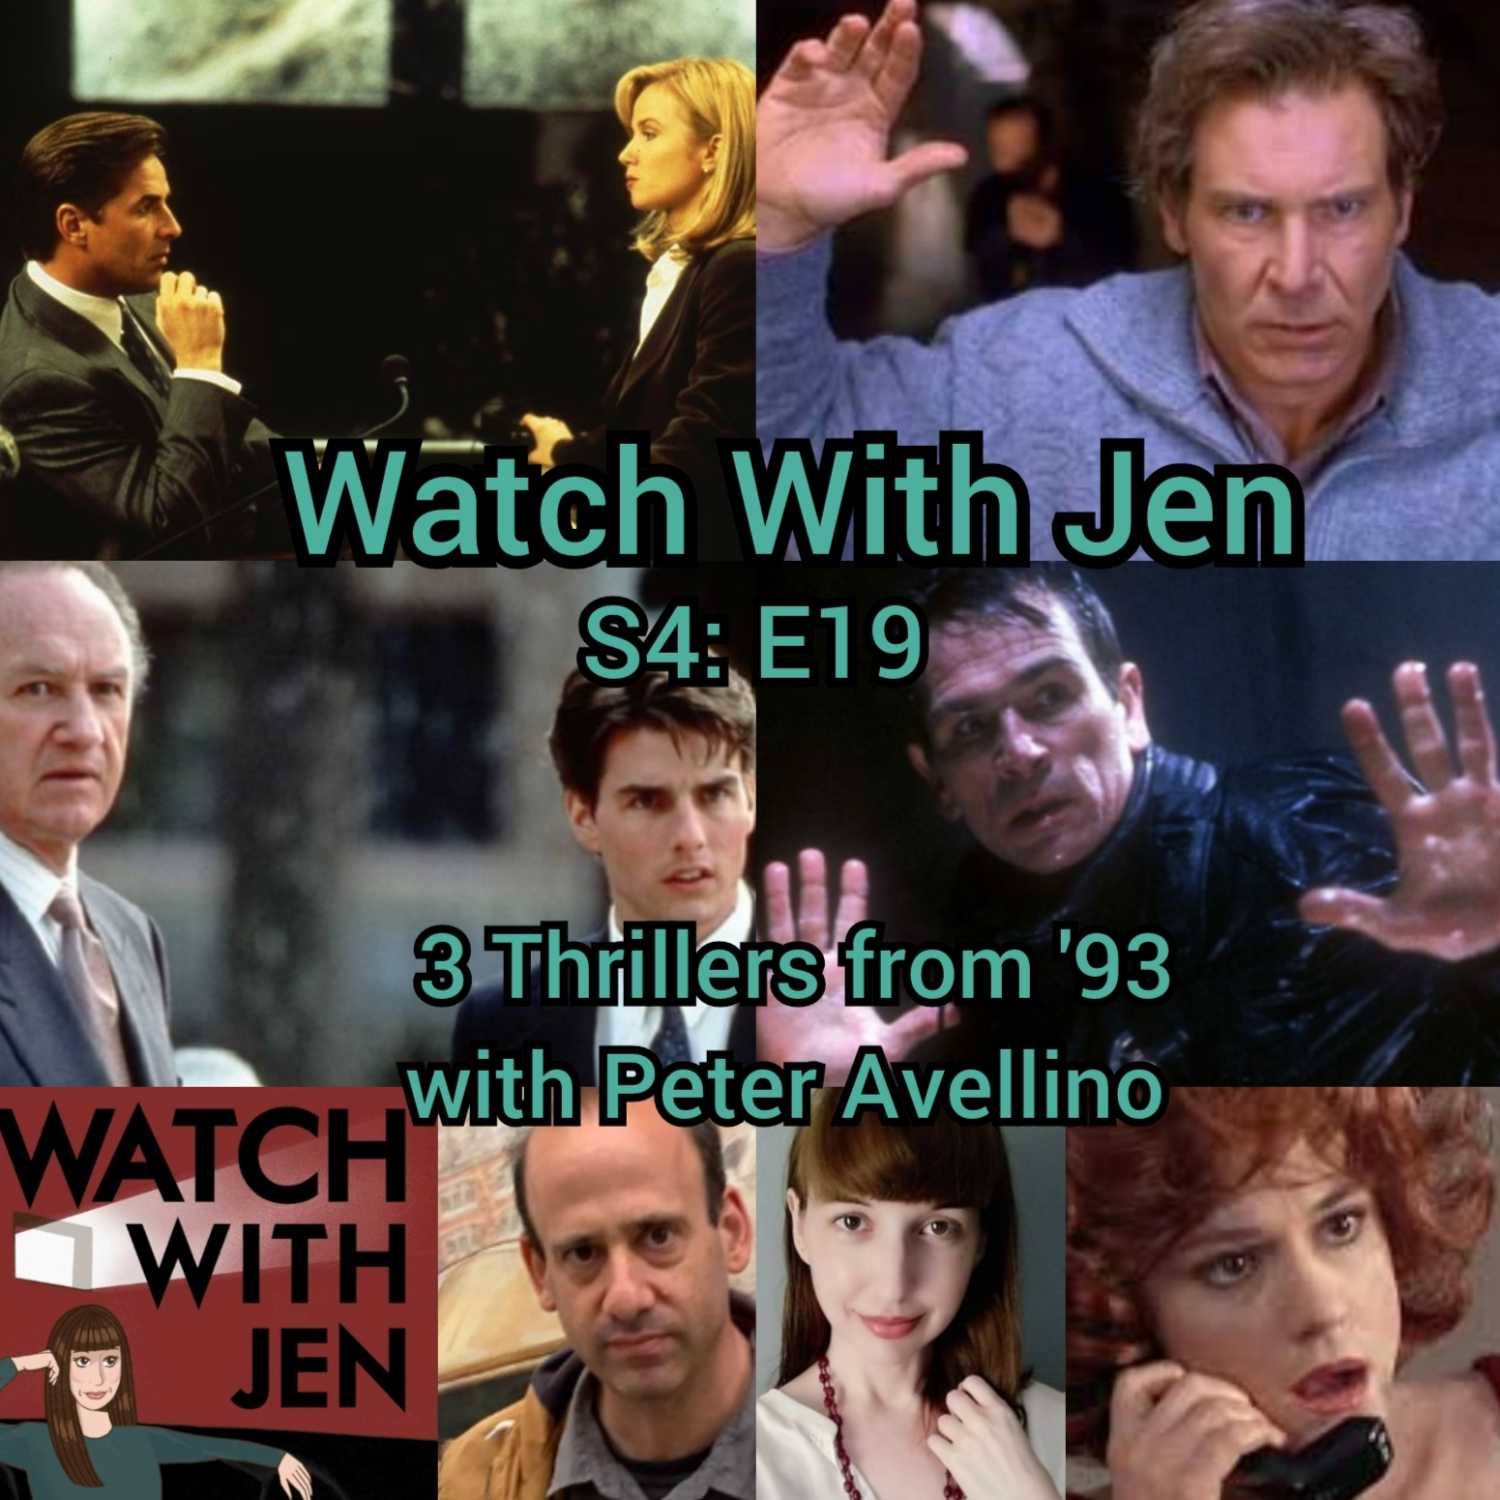 Watch With Jen - S4: E19 - 3 Thrillers from '93 with Peter Avellino